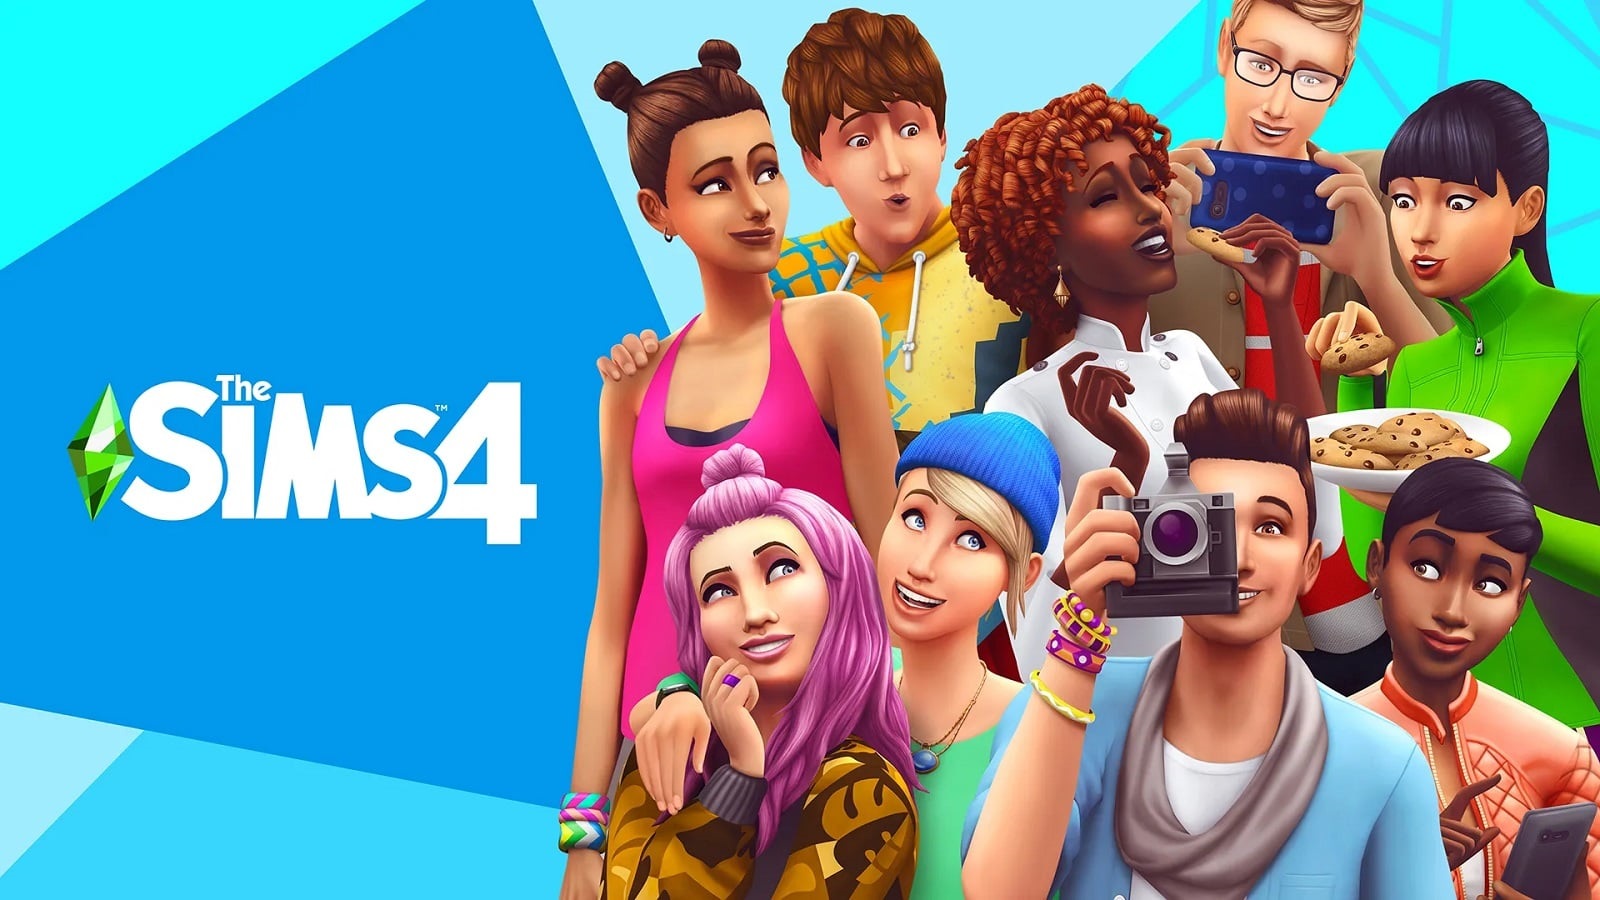 The Sims 4; screenshot: cover